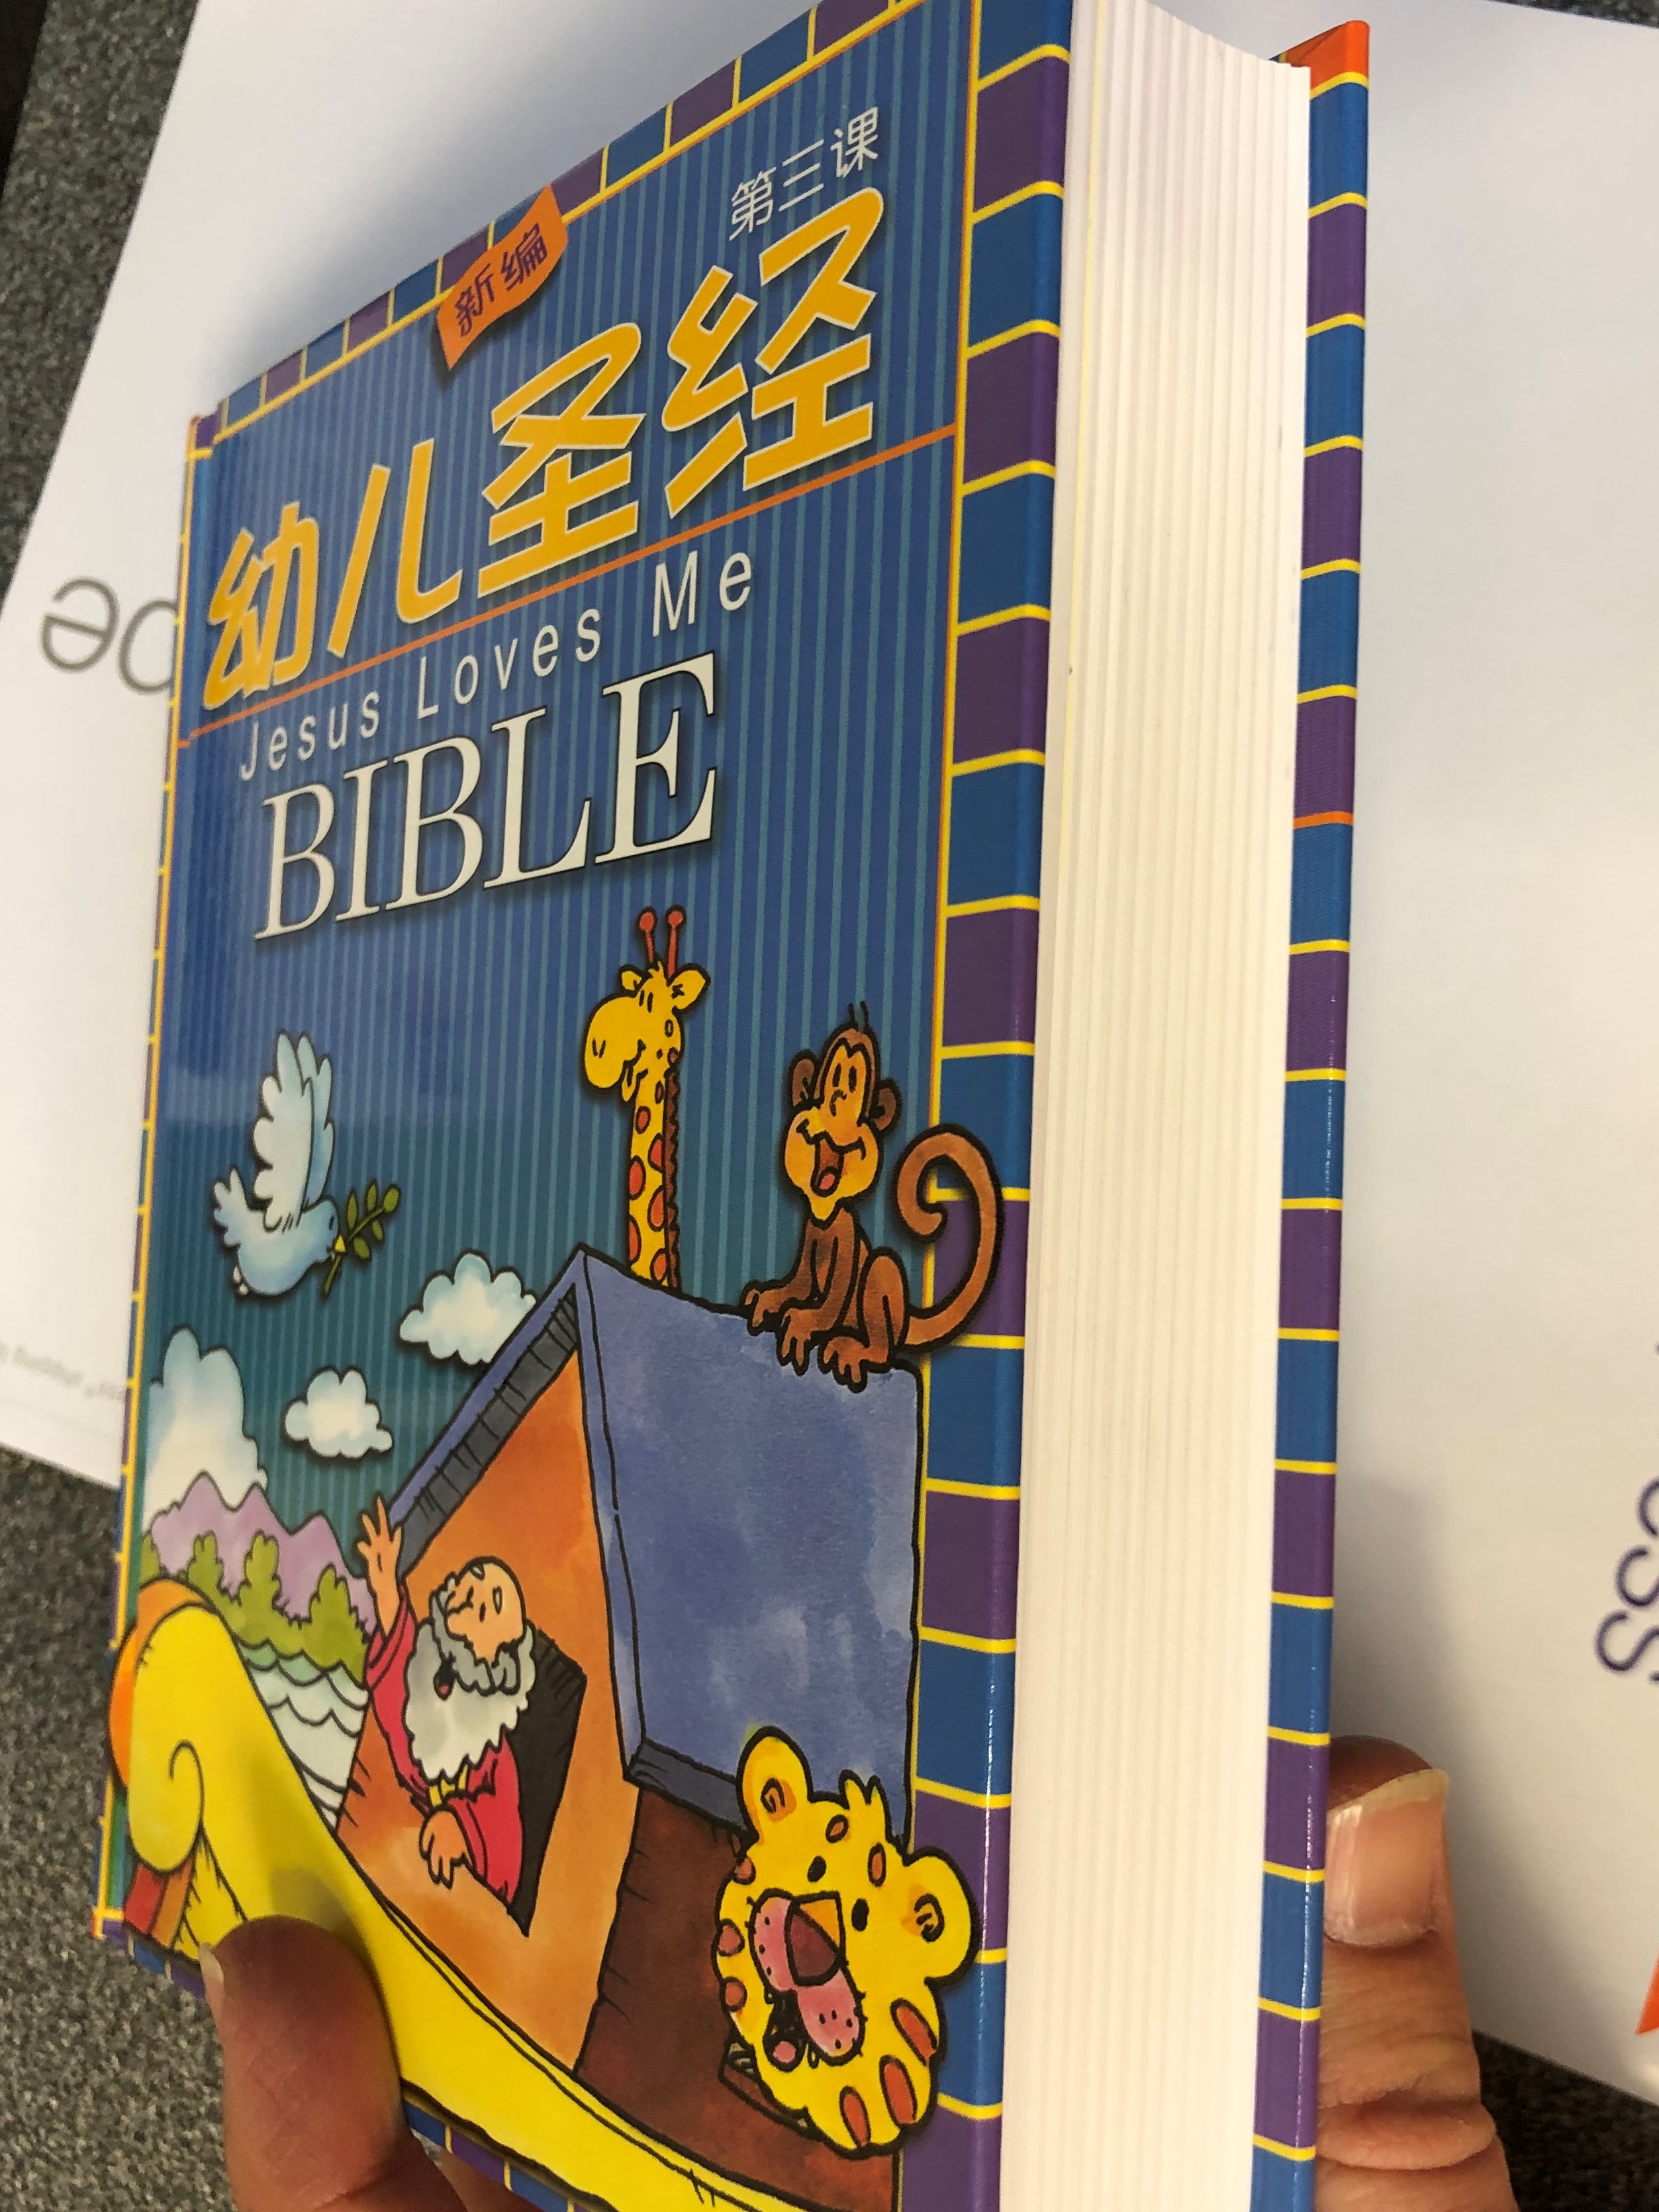 jesus-loves-me-bible-children-s-bible-in-chinese-for-children-of-5-8-age-hardcover-2001-tommy-nelson-usa-4-.jpg